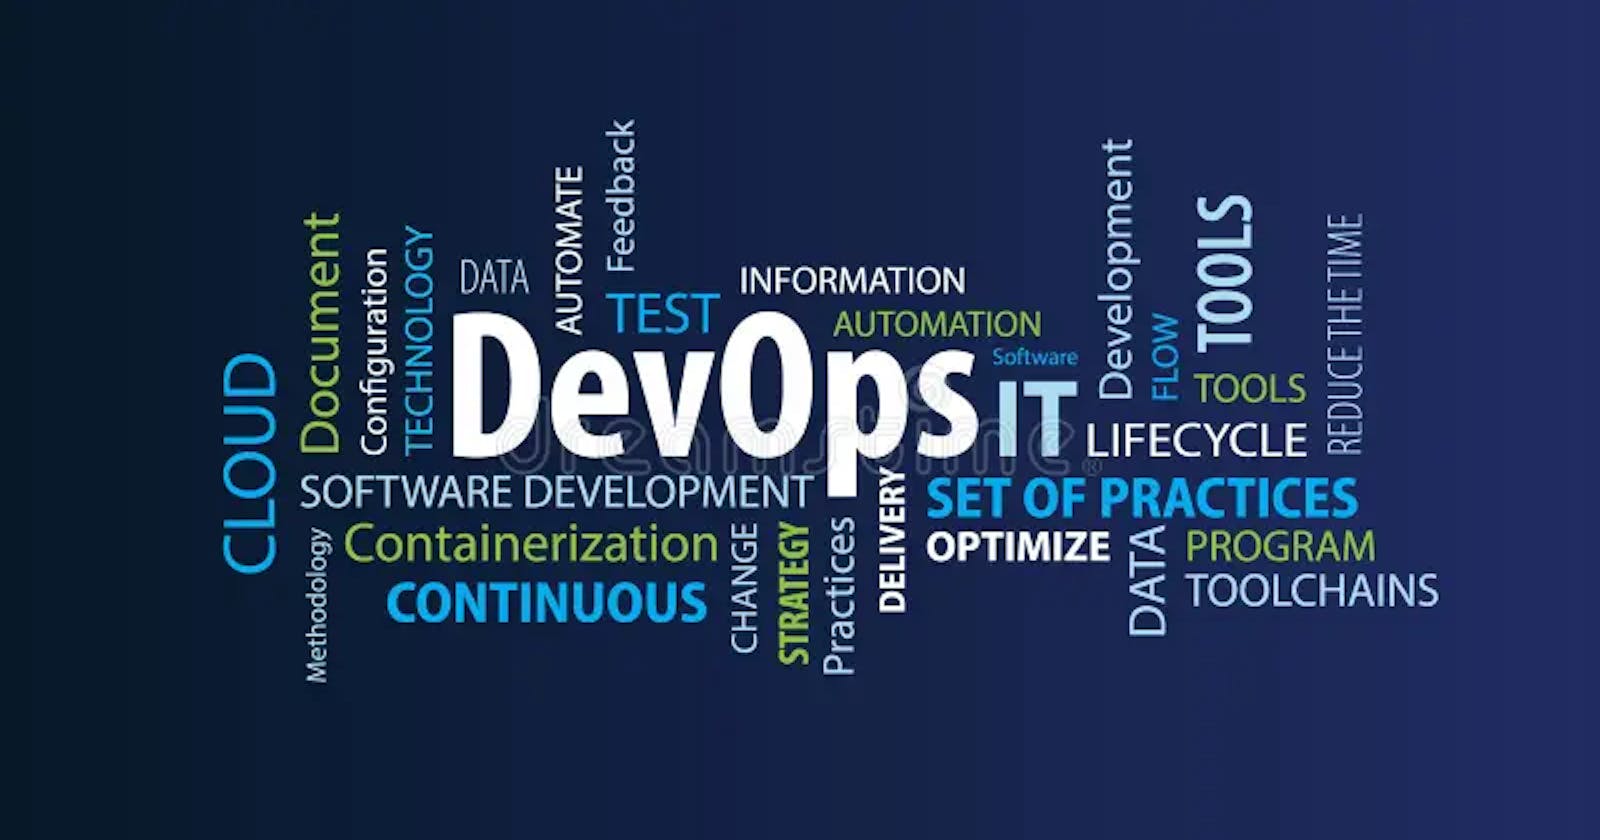 Introduction to Devops!!